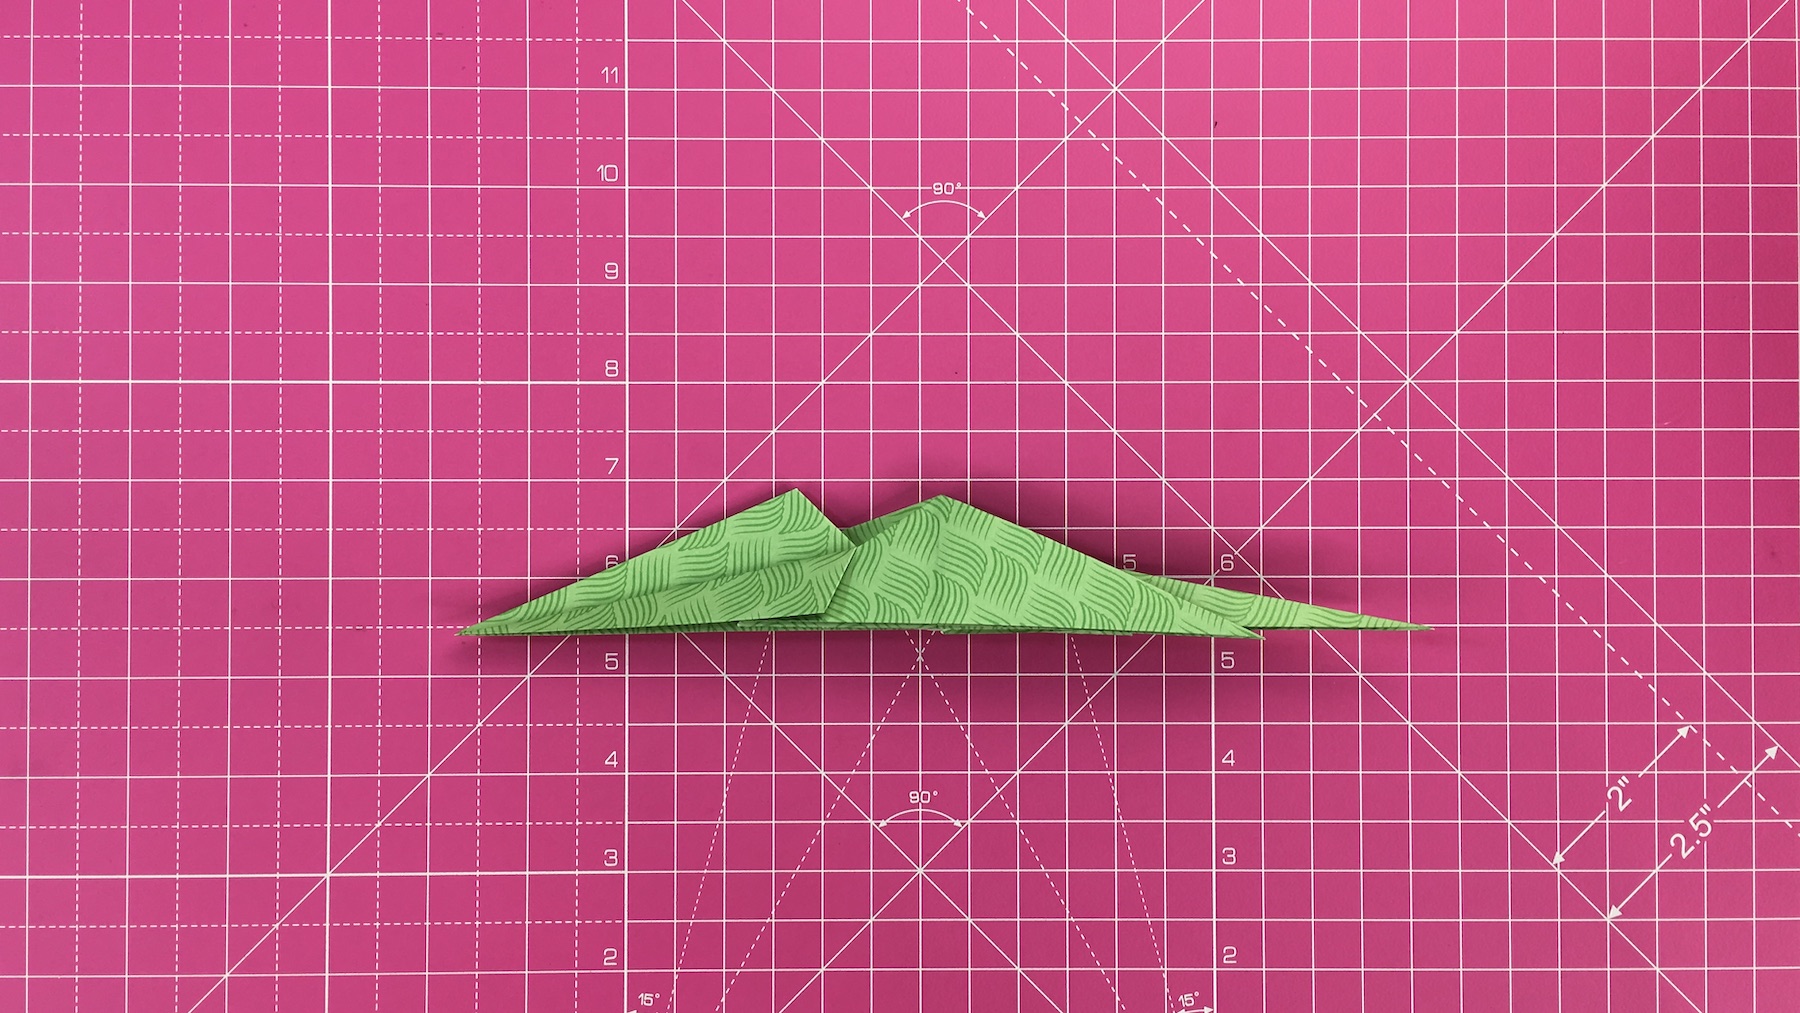 How to make an origami dragon, origami dragon tutorial - step 33a